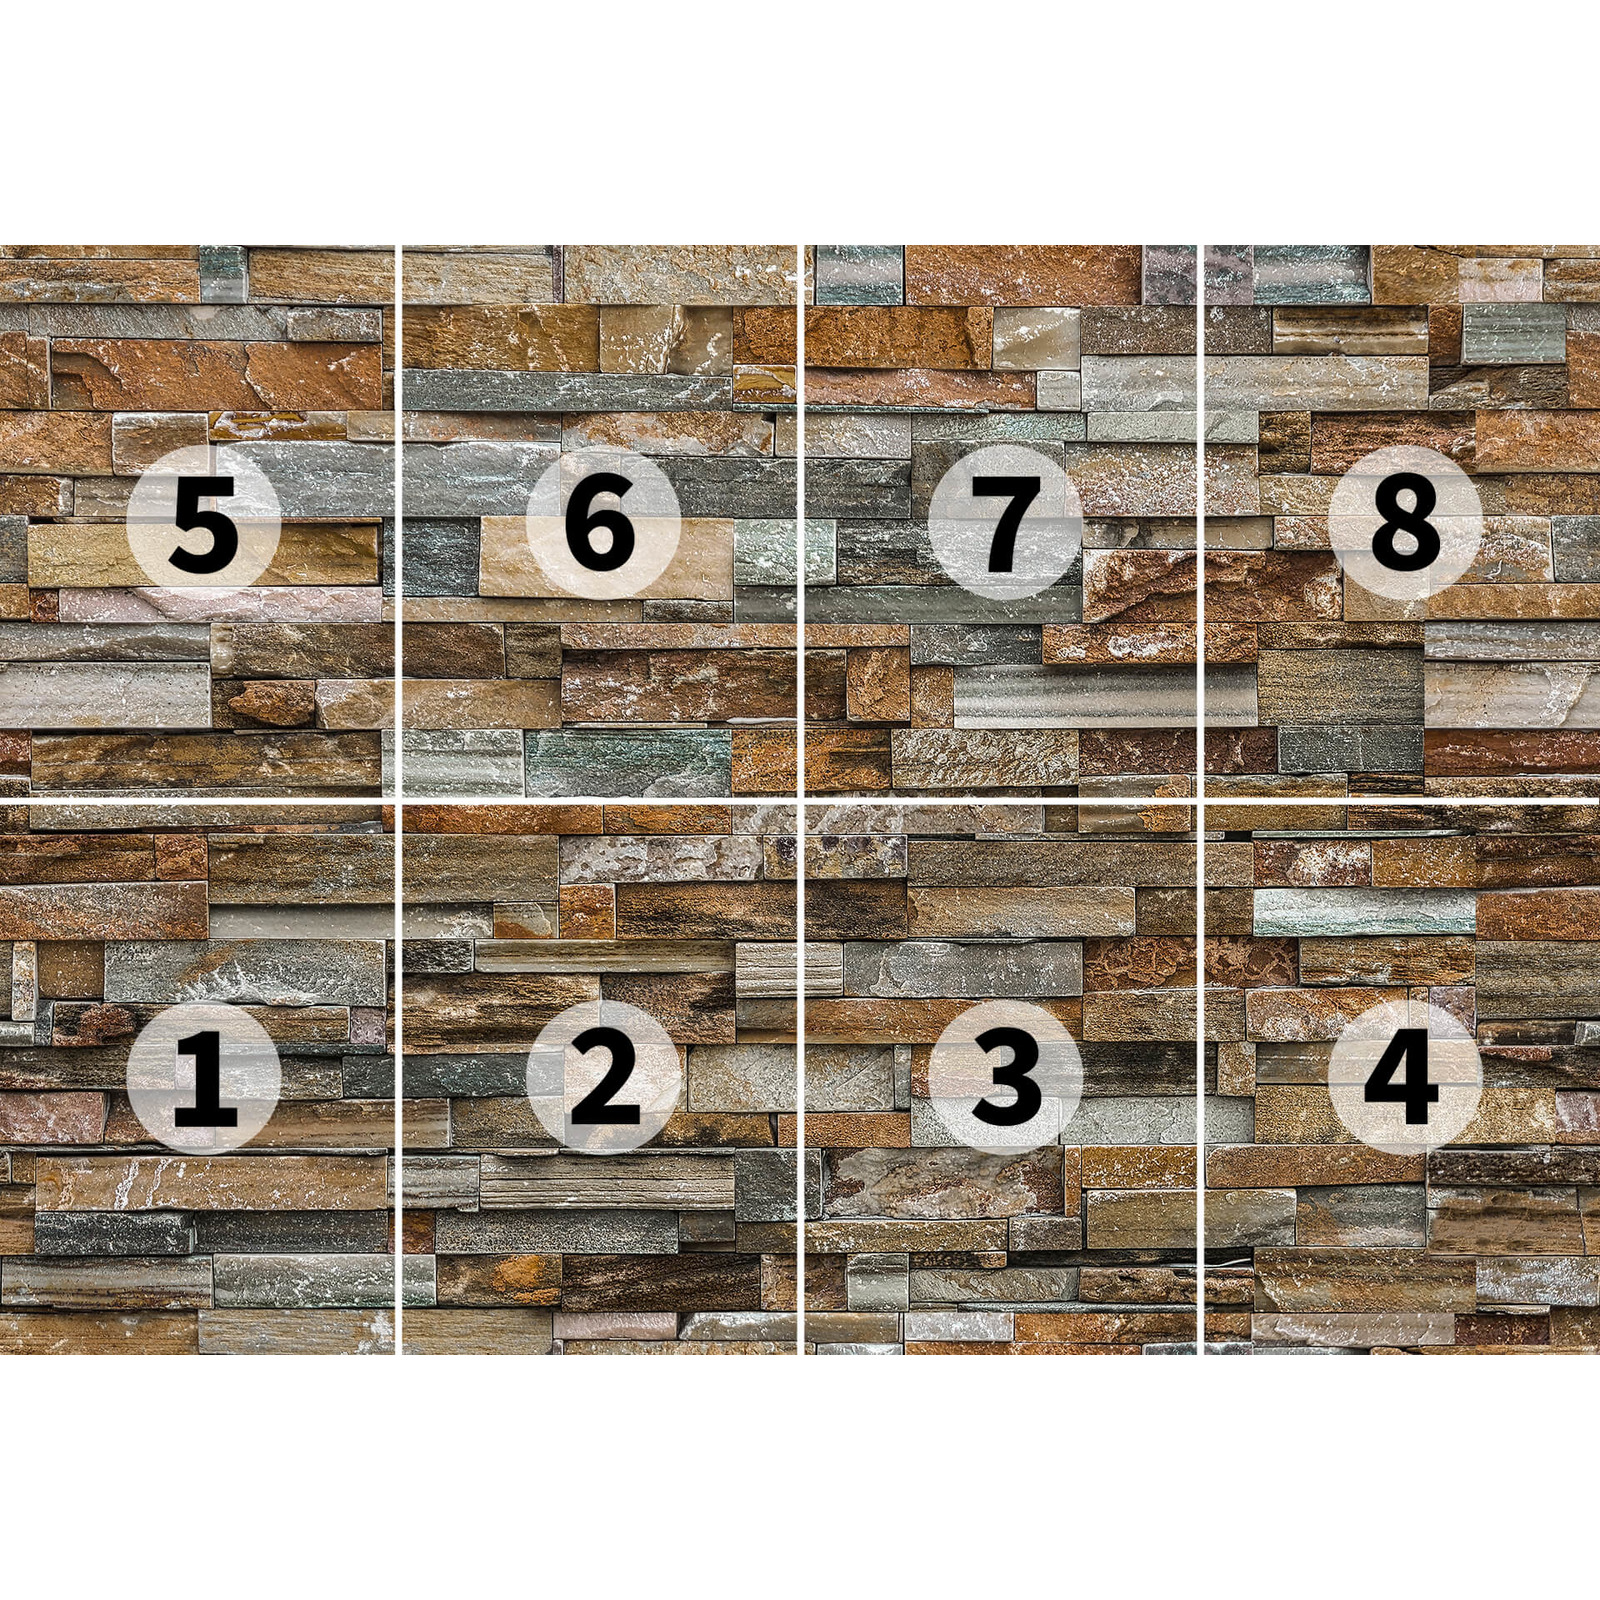             Stone wall mural with 3D brickwork - brown, grey
        